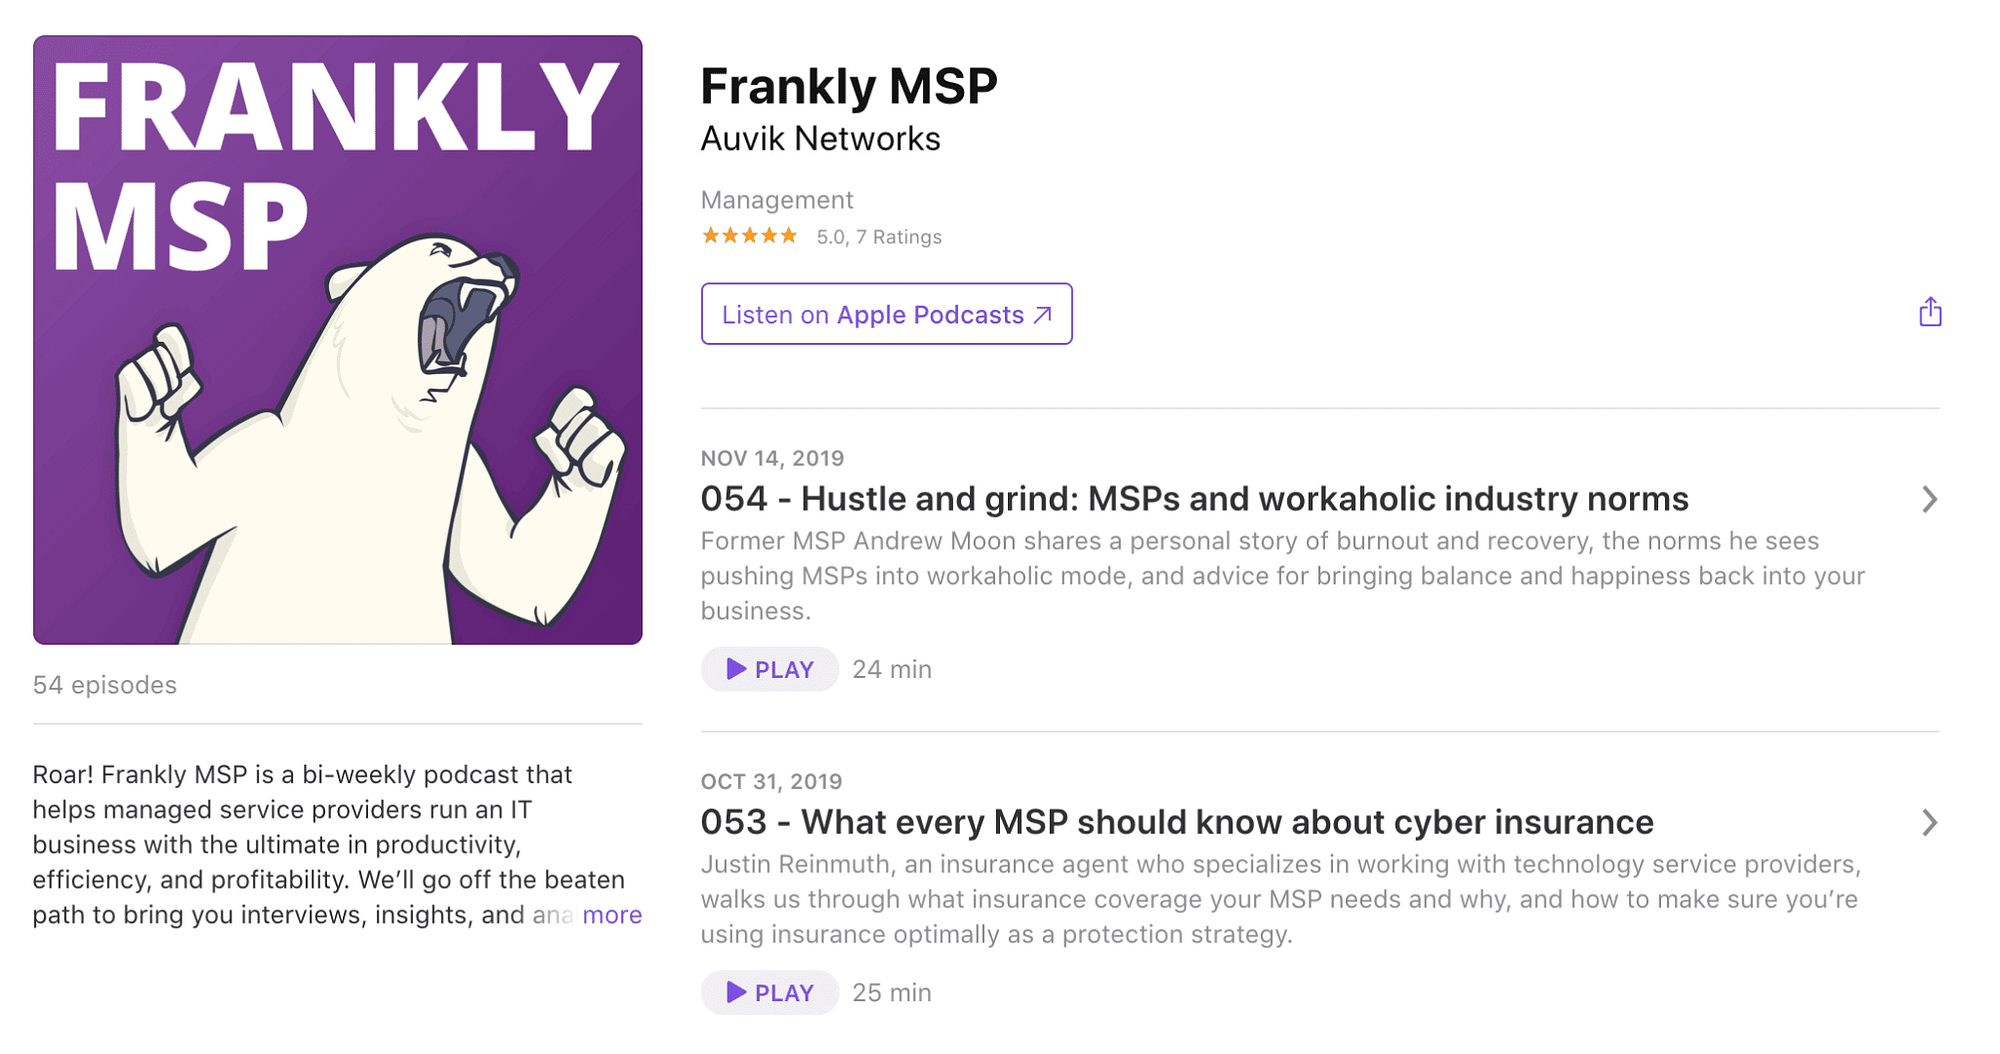 Frankly MSP Podcast from Auvik